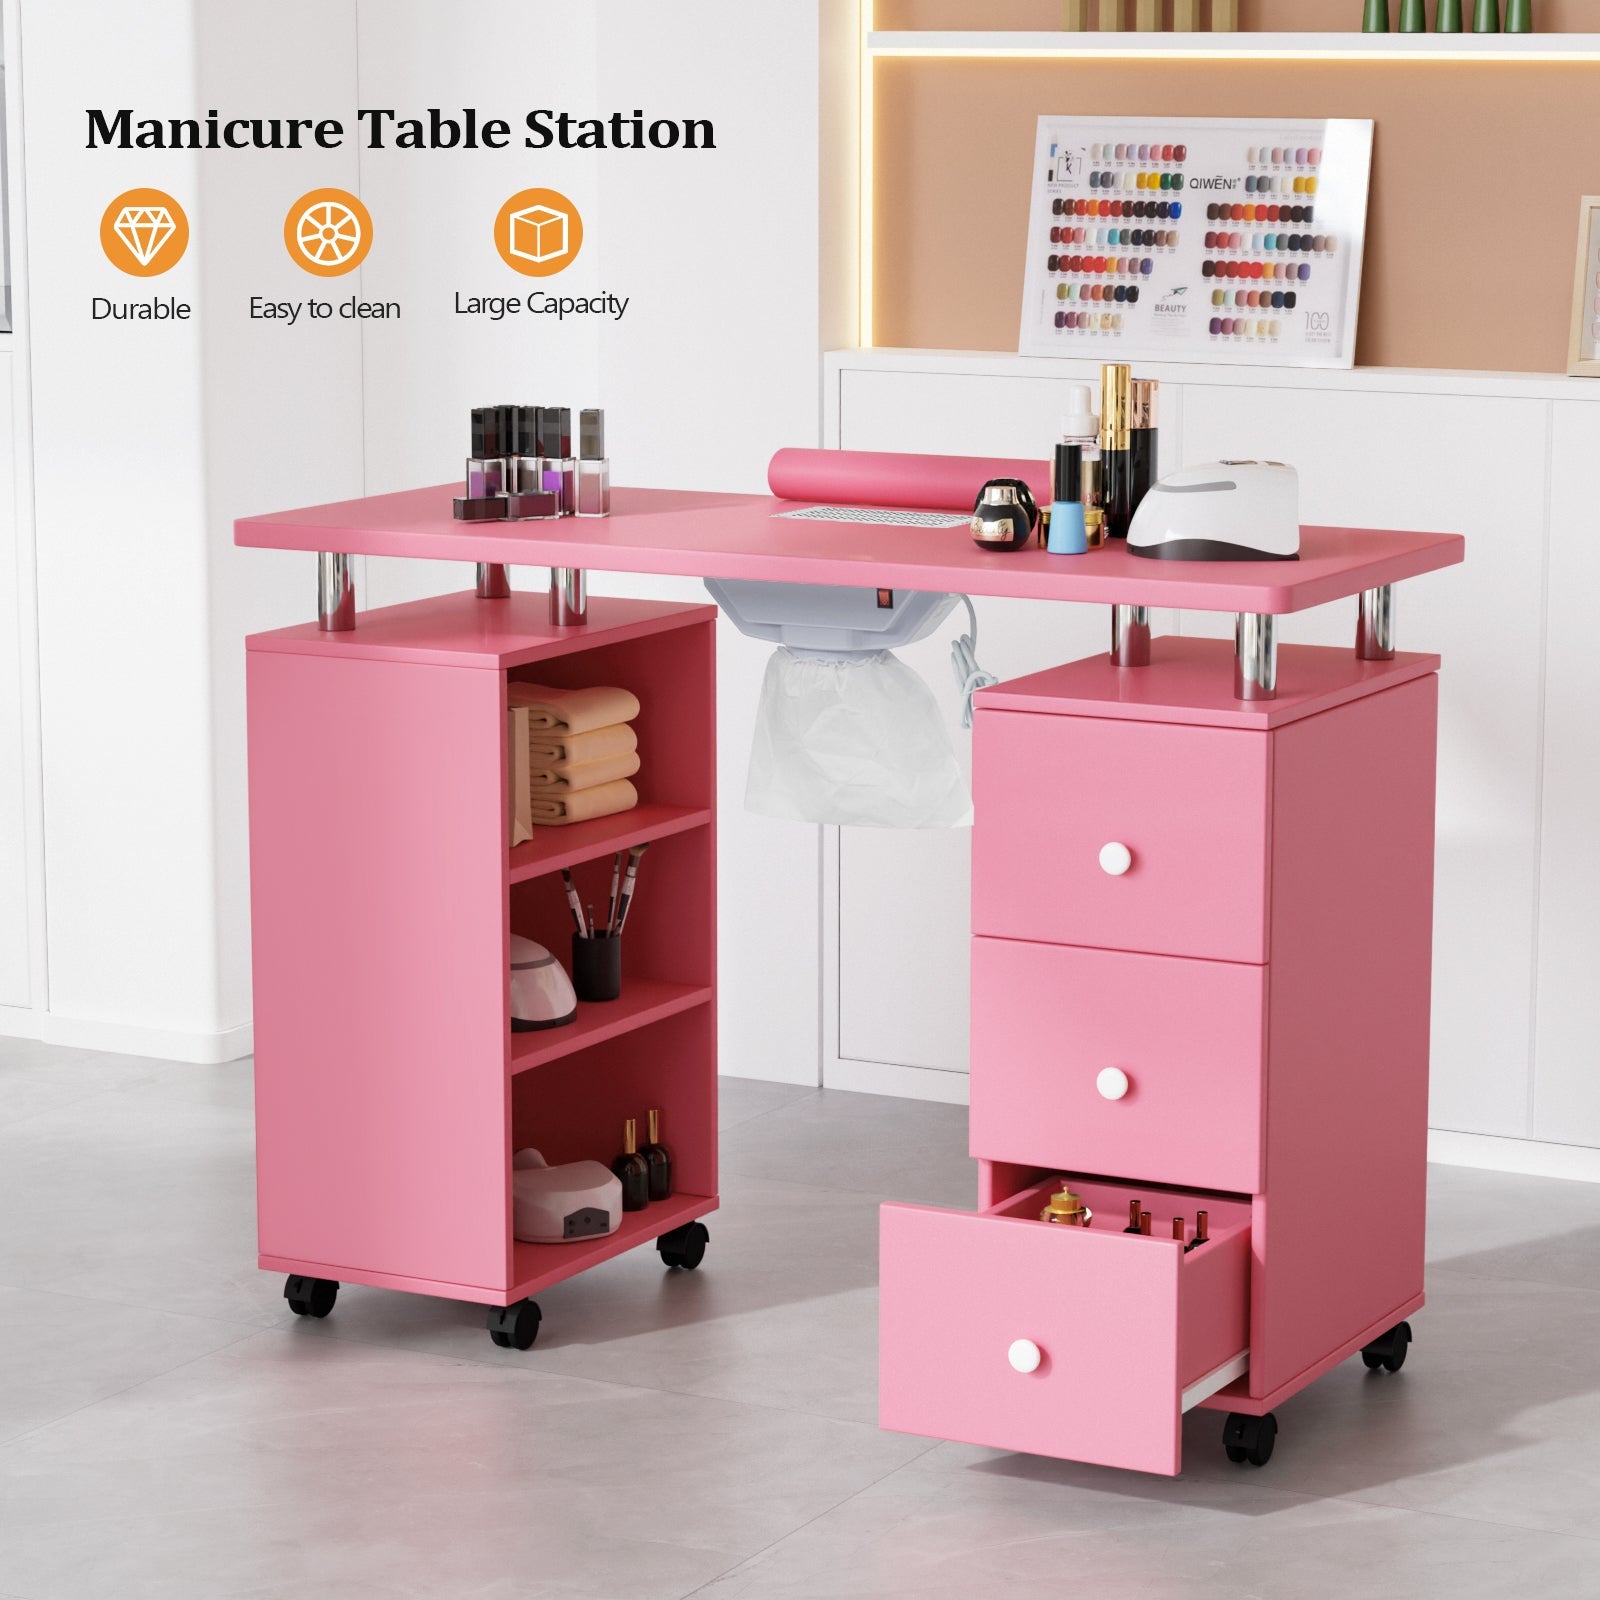 Omysalon Manicure Table w/Electric Dust Collector